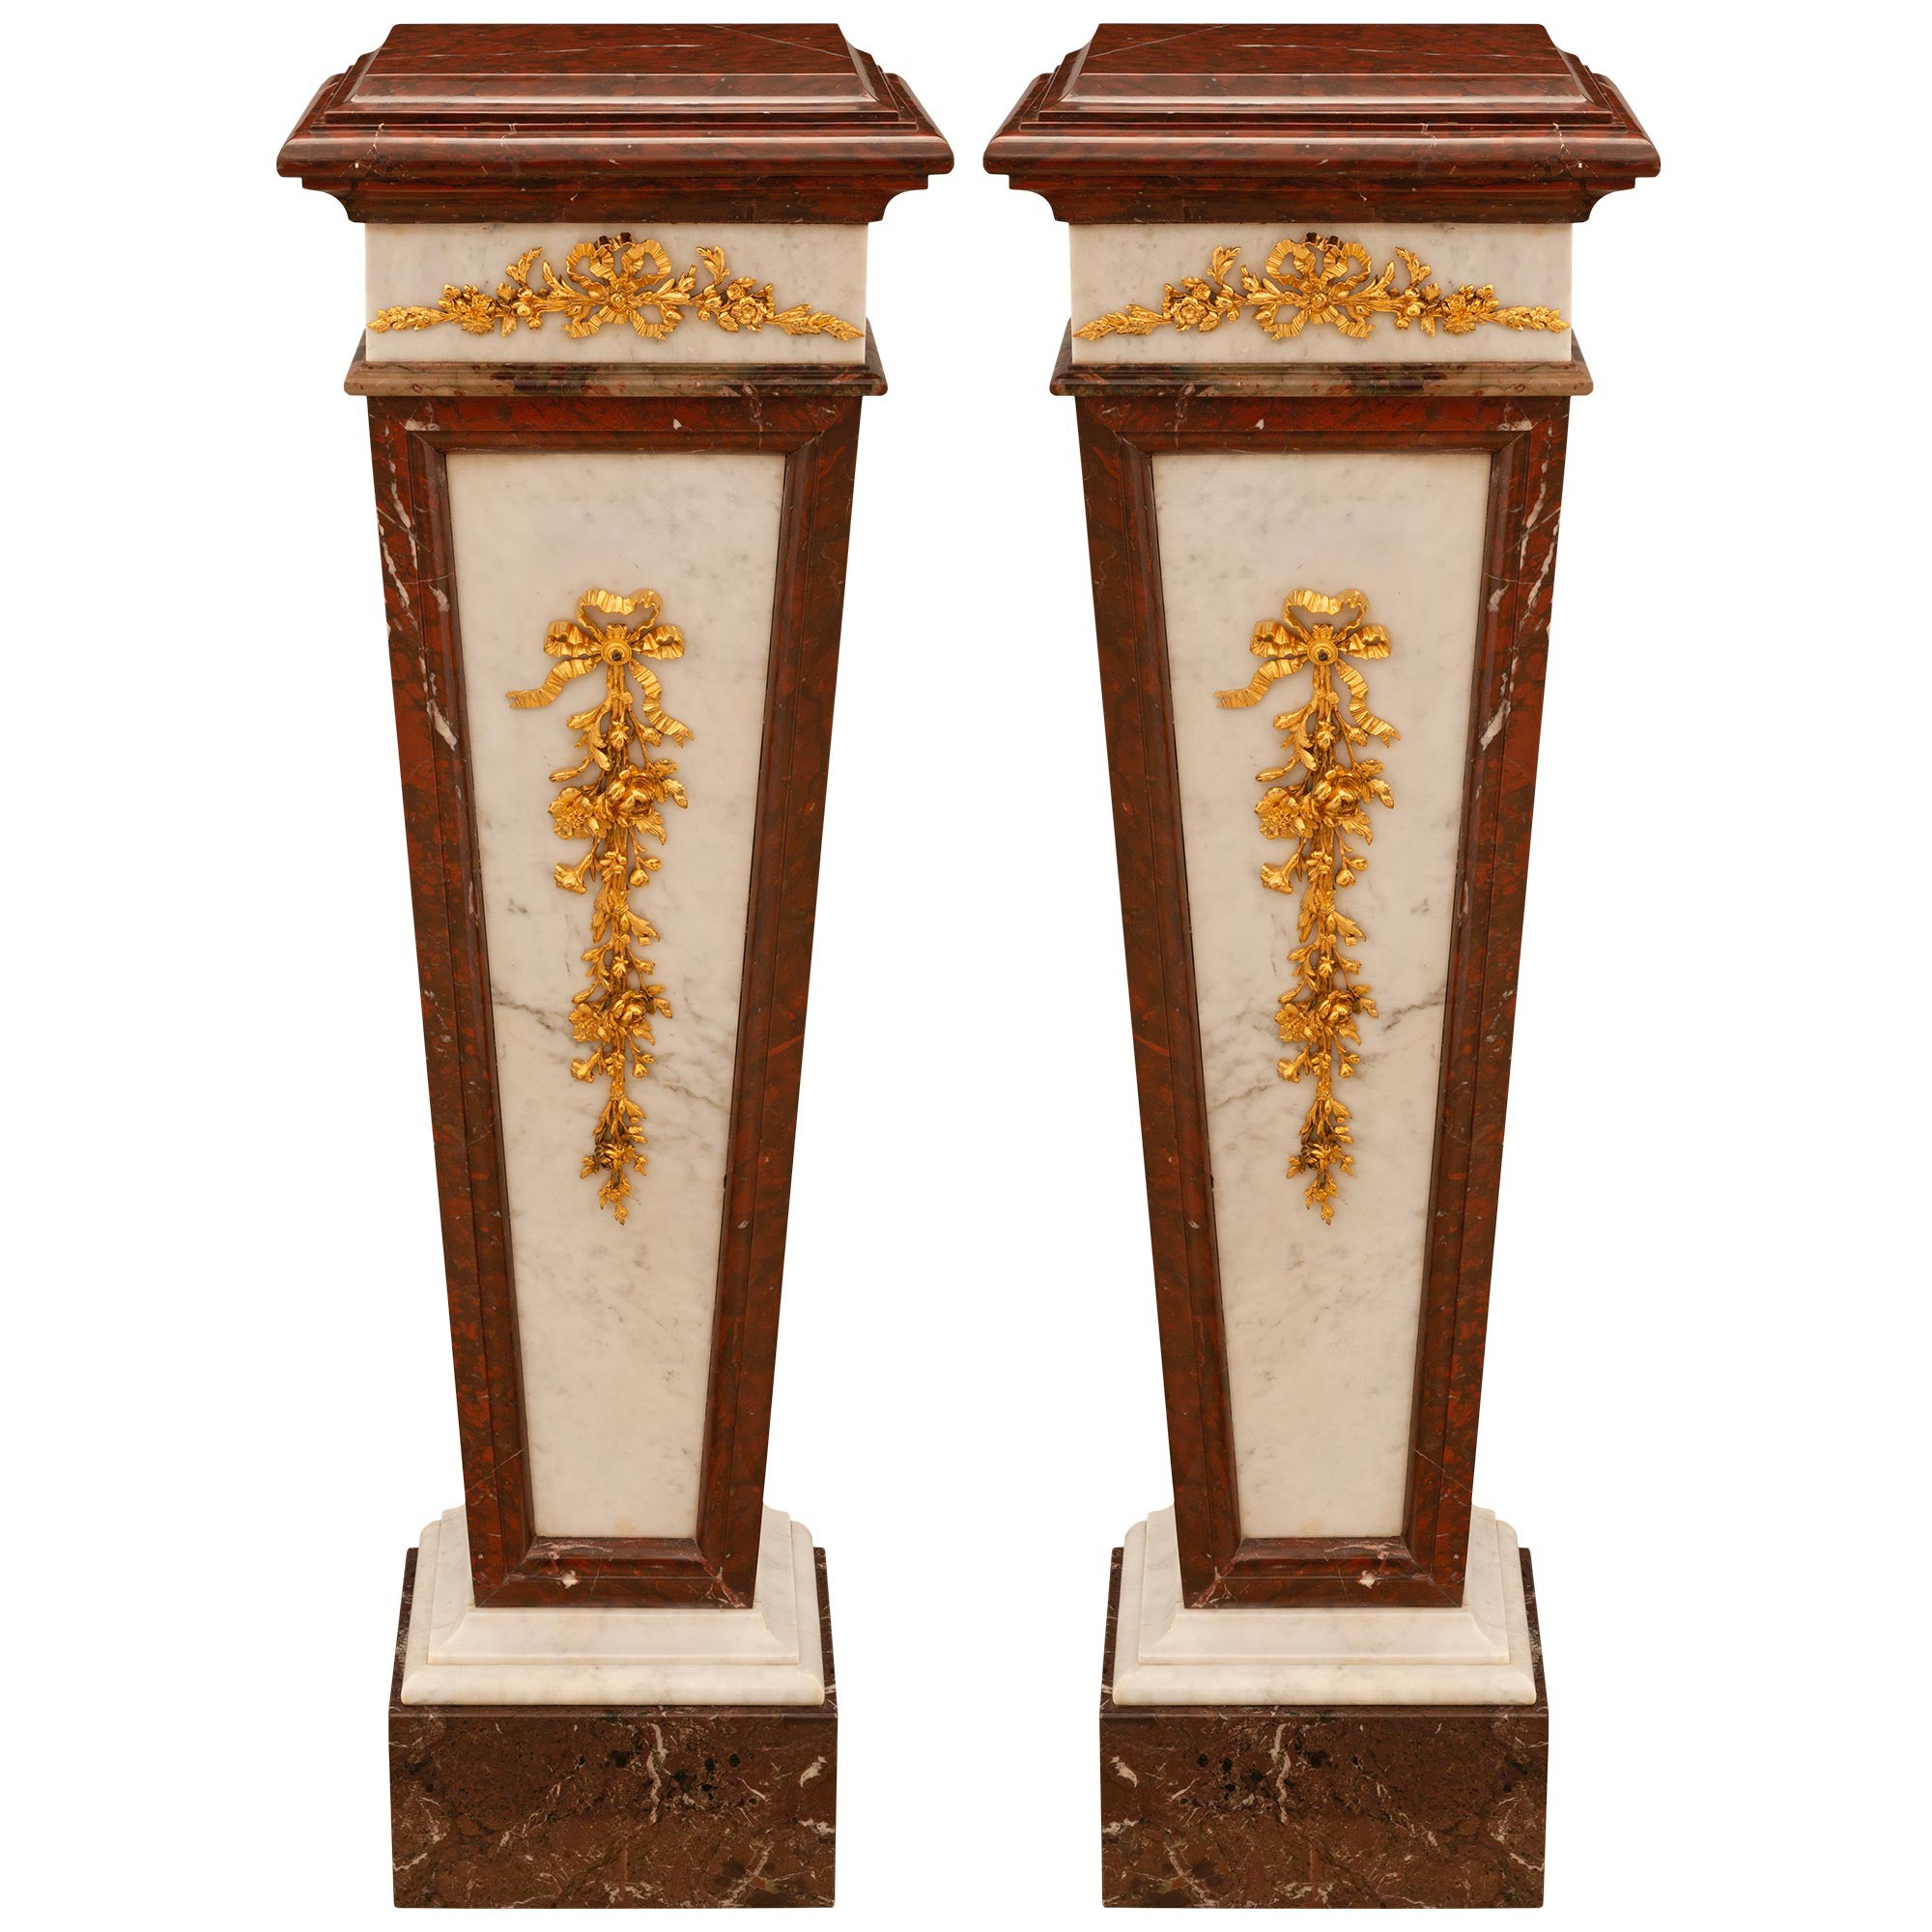 Pair Of French 19th c. Louis XVI St. Rouge Griotte & Ormolu Pedestals